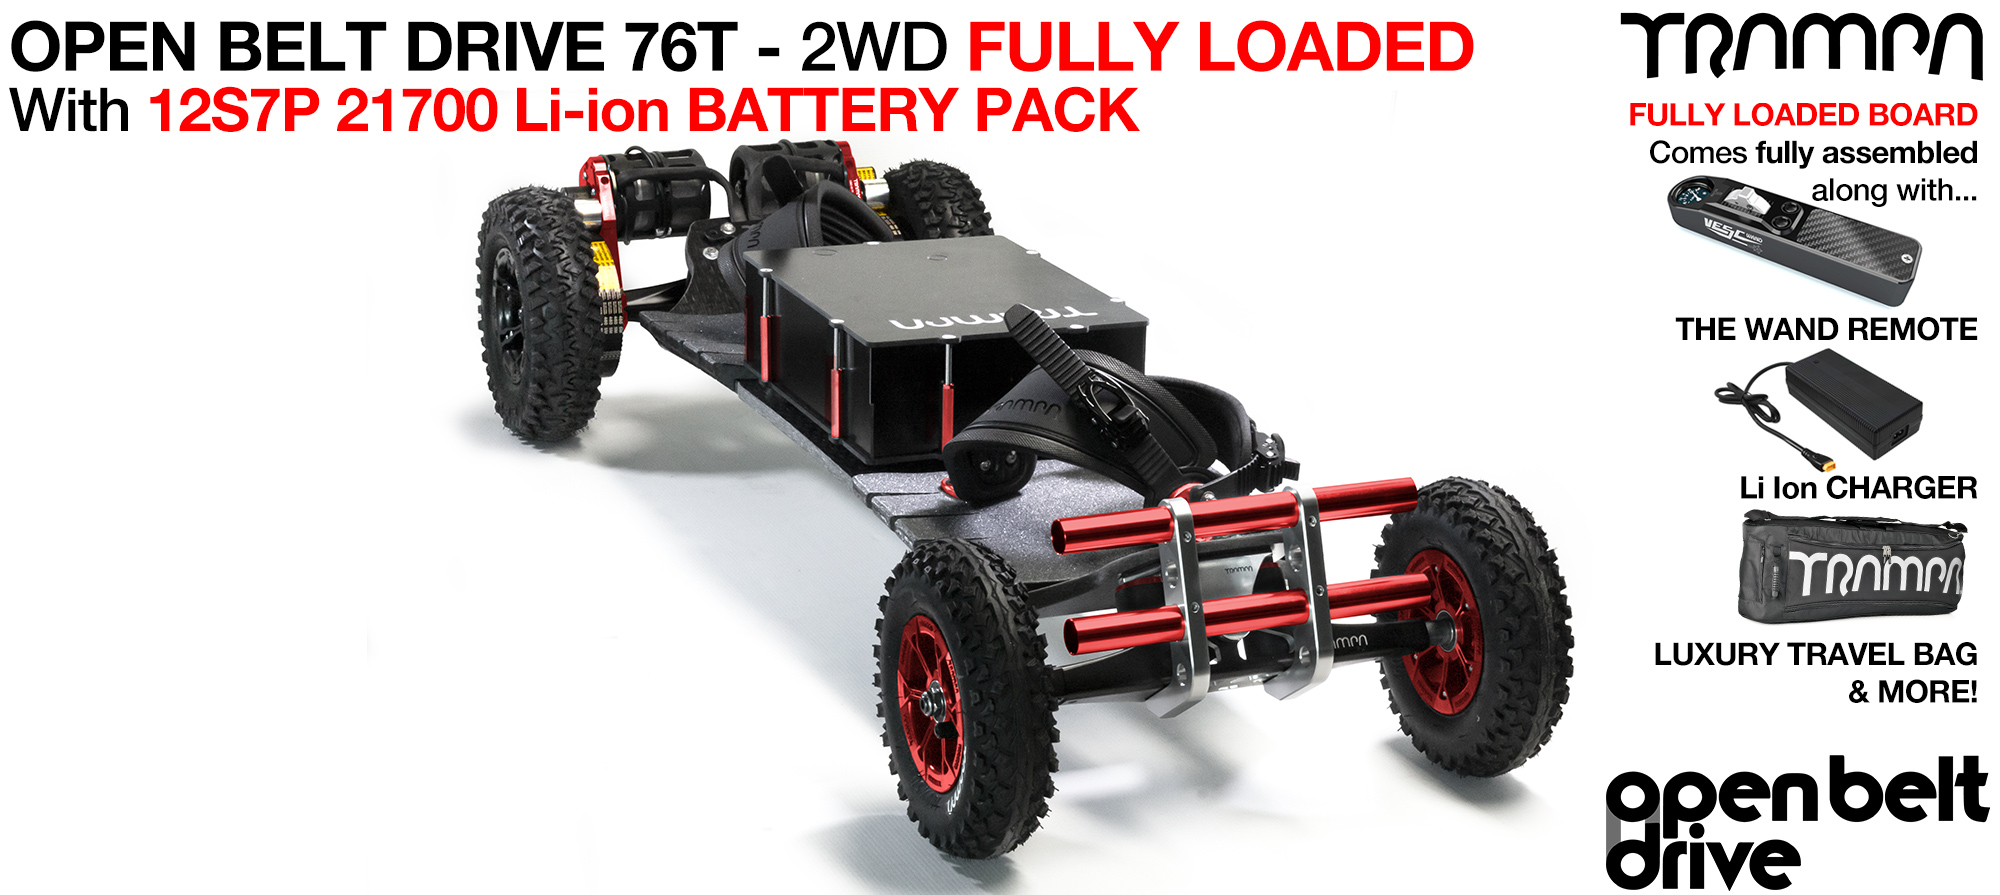 2WD 76T Open Belt Drive TRAMPA Electric Mountainboard Fits up to 9Inch Wheels using 76 Tooth Pulleys - FULLY LOADED 21700 Cell Pack